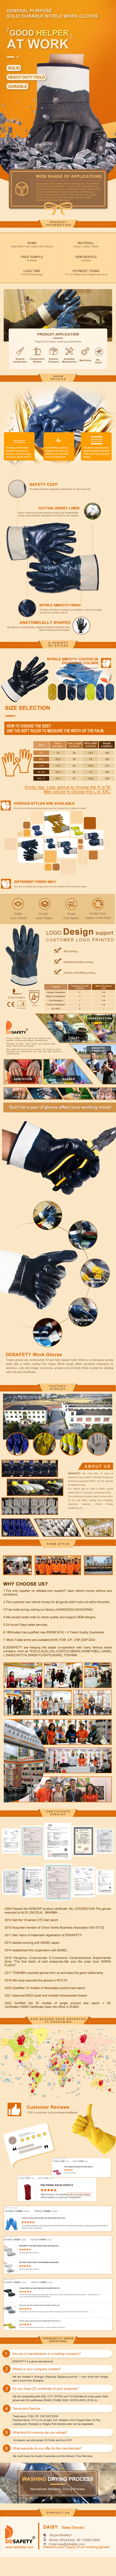 Durable Heavy Duty Nbr Solid Nitrile Safety Work Oil Gloves For Men Ce 4121 - DCN308 Durable Heavy Duty Nbr Solid Nitrile Safety Work Oil Gloves For Men Ce 4121 - DCN308 gloves,nitrile gloves,nitrile coated gloves,work gloves,heavy duty glove